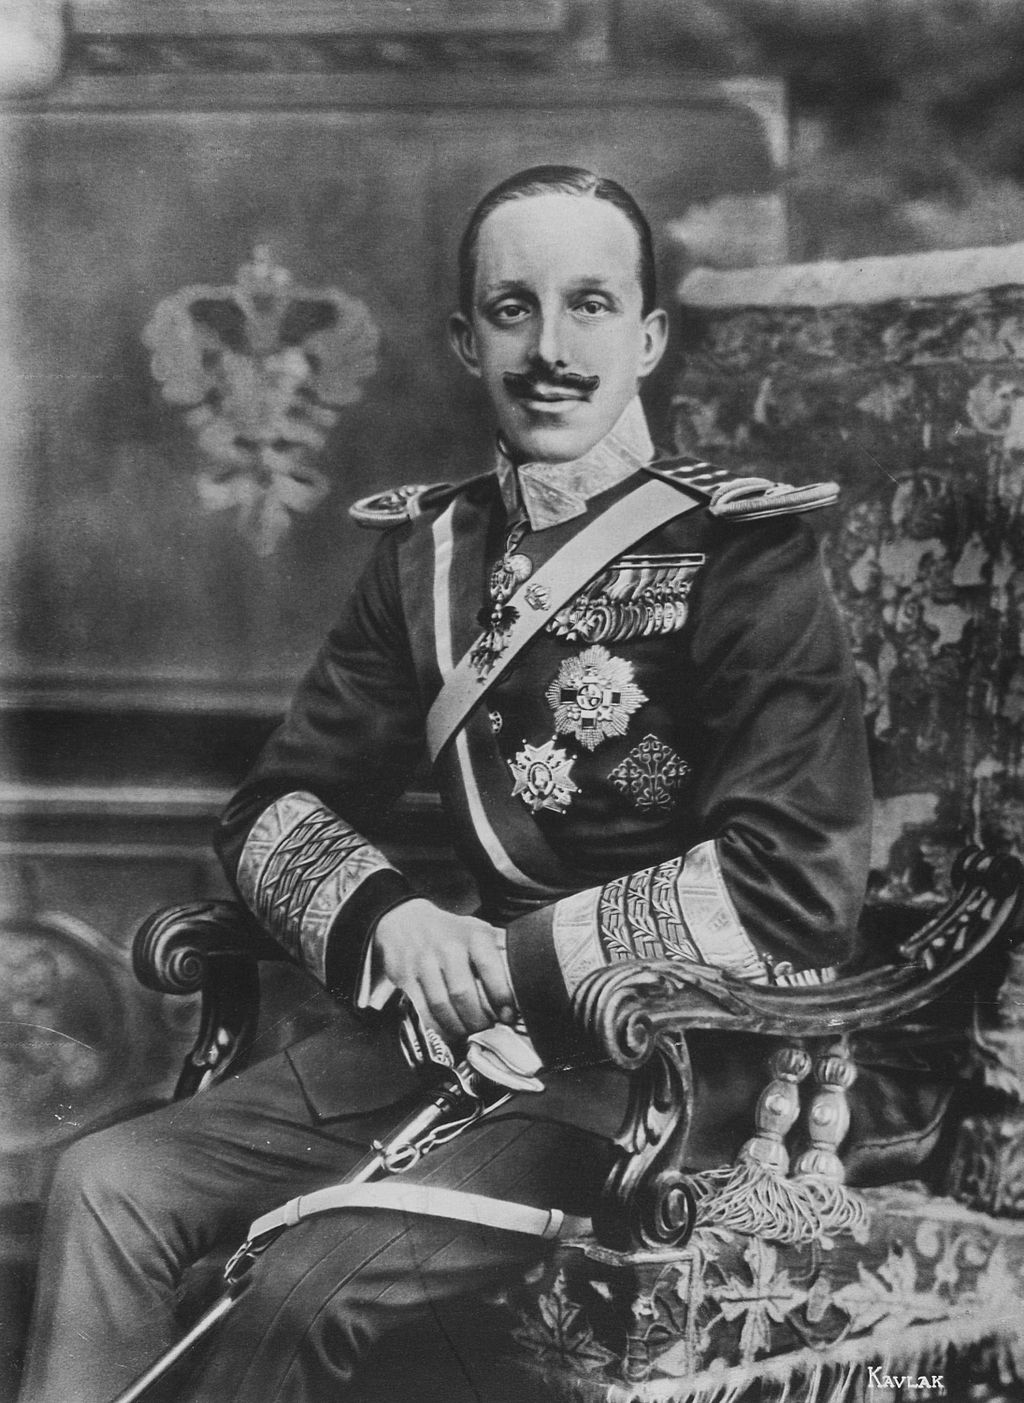 King Alfonso XIII of Spain (r. 1886-1931)